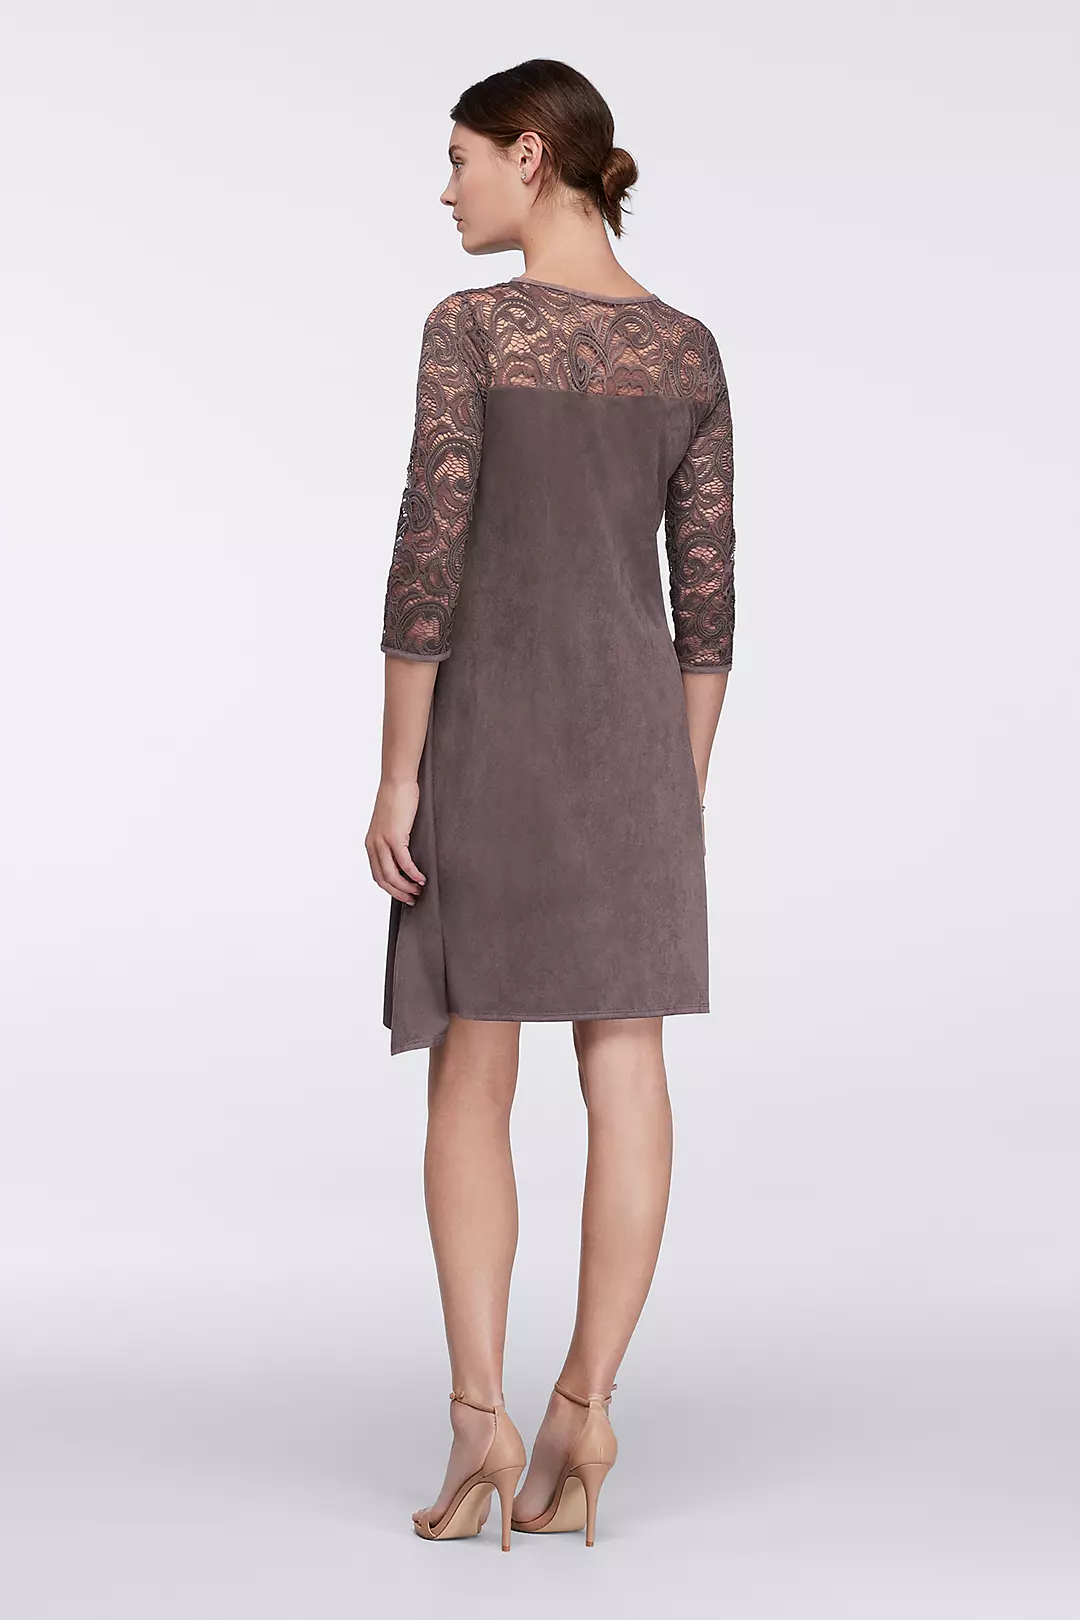 Lace and Faux-Suede Swing Dress Image 2